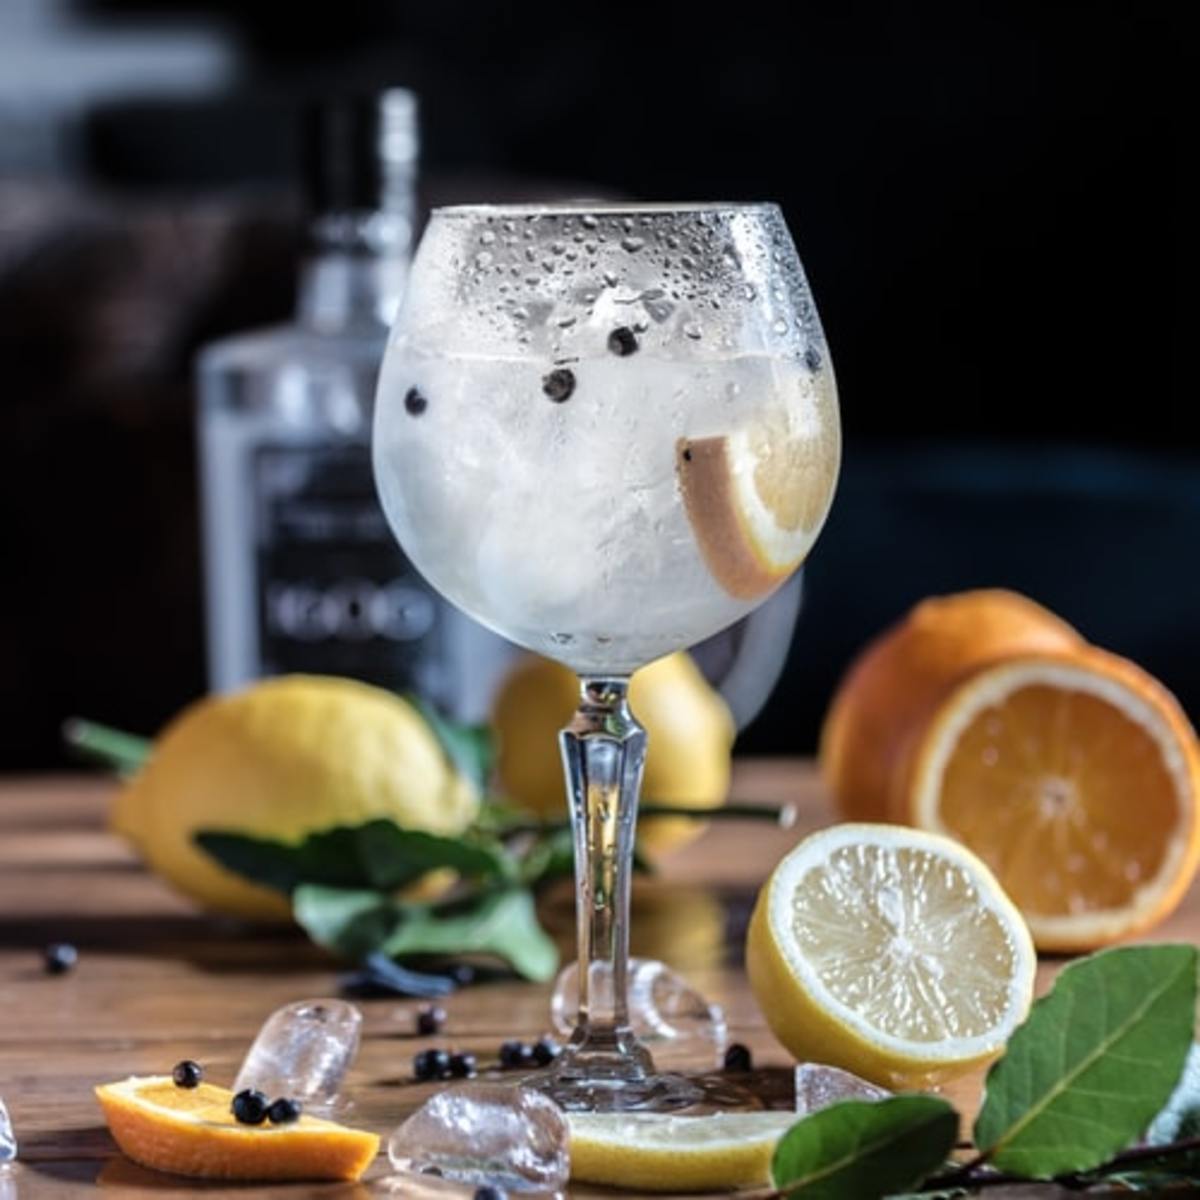 Gin cocktail